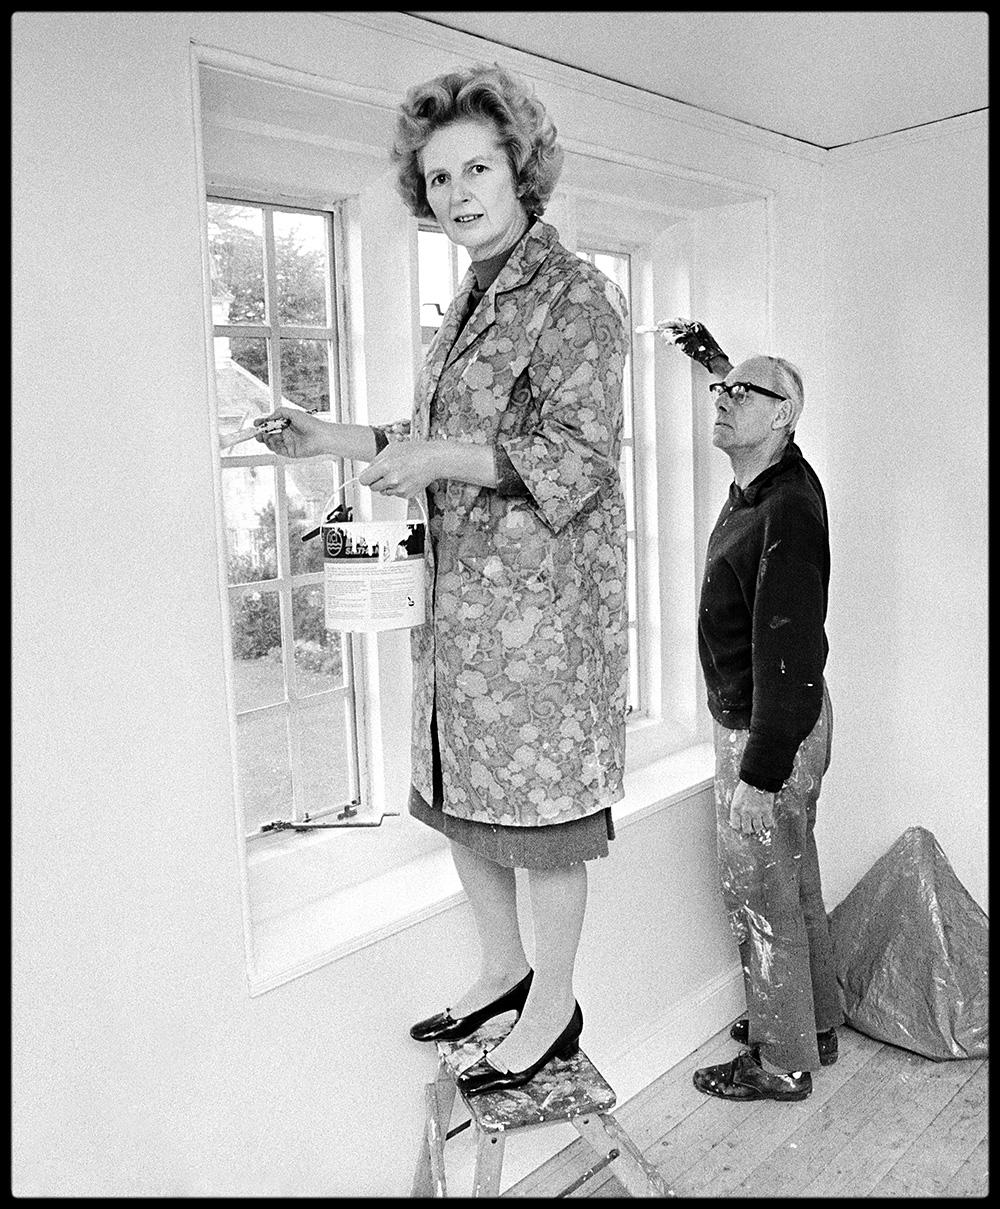 Thatcher Decorating Ironing Lady

By Arthur Steel 

Paper size: 54 x 41" / 137 x 104 cm

Silver Gelatin Print
1970 (printed later)
unframed
hand signed
limited edition of 20

note other print sizes and framing options are available, please enquire